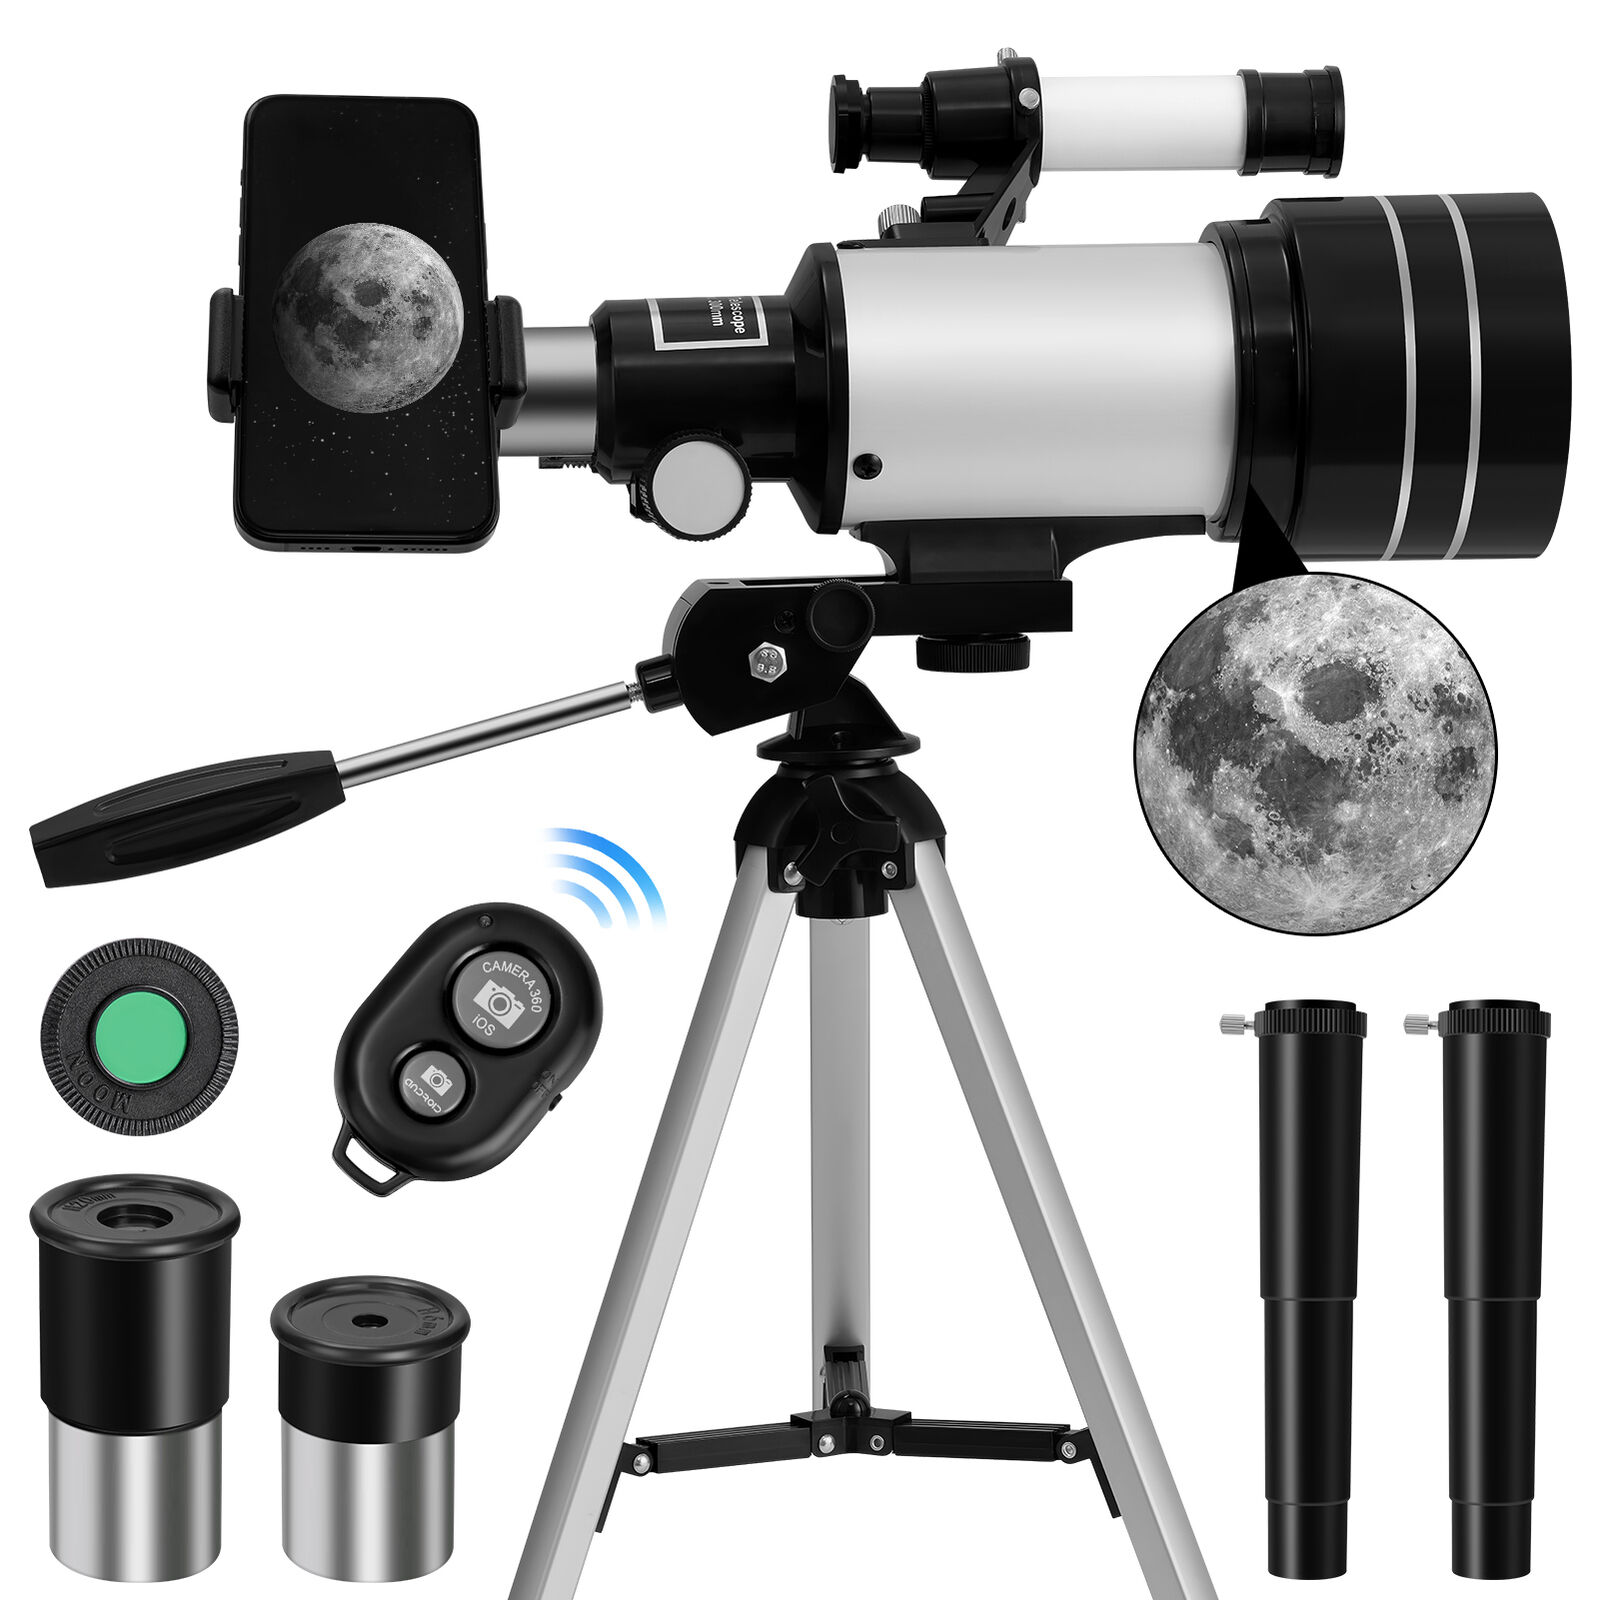 2 pack | Professional Astronomical Telescope Night Vision w/ HD Viewing Space